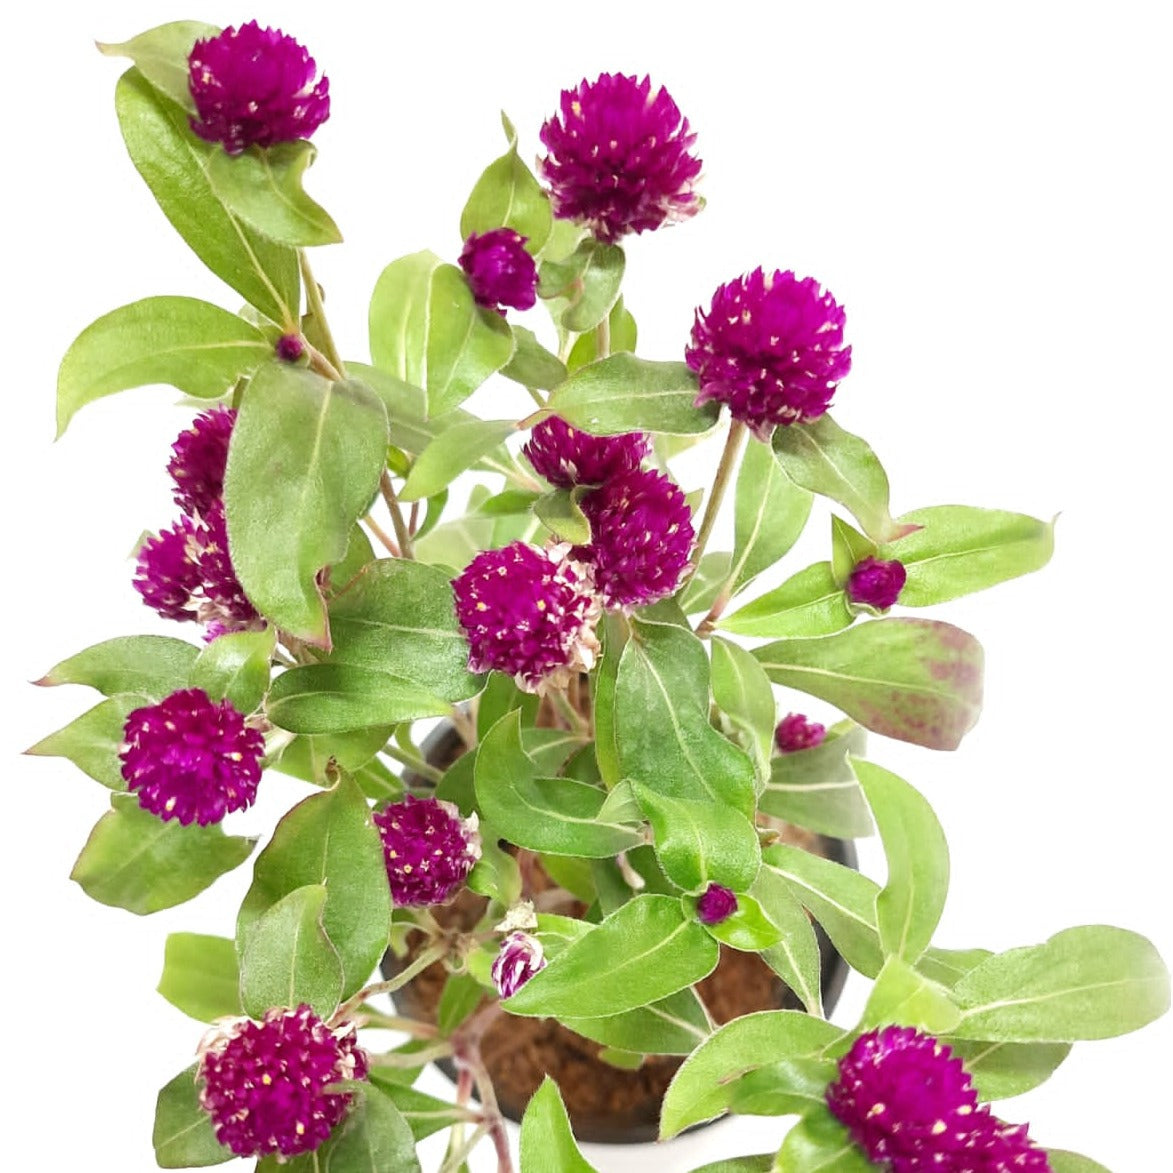 Gomphrena Haageana – Shop Online for Your Garden, Gomphrena Variety for Sale – Easy-Care Ornamental Plant, Buy Gomphrena Seeds Online – Start Your Garden Project, Globe Amaranth Plant for Online Purchase